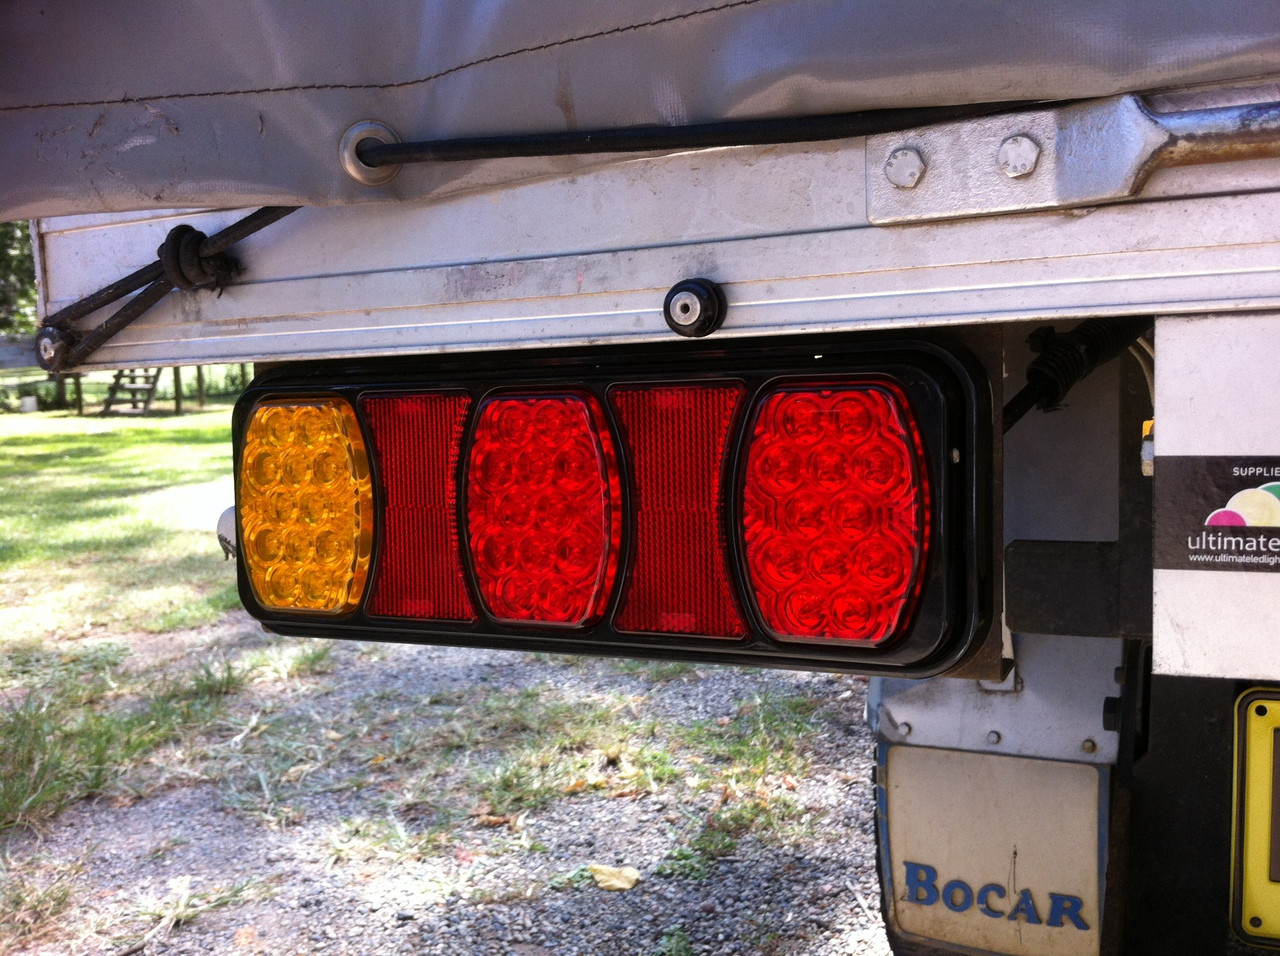 BR80 Series fitted to Tray Top - BR80ARR - Light Truck LED Tail Light Assembly Built in Reflector, Stop, Tail and Indicator. Ultimate LED.